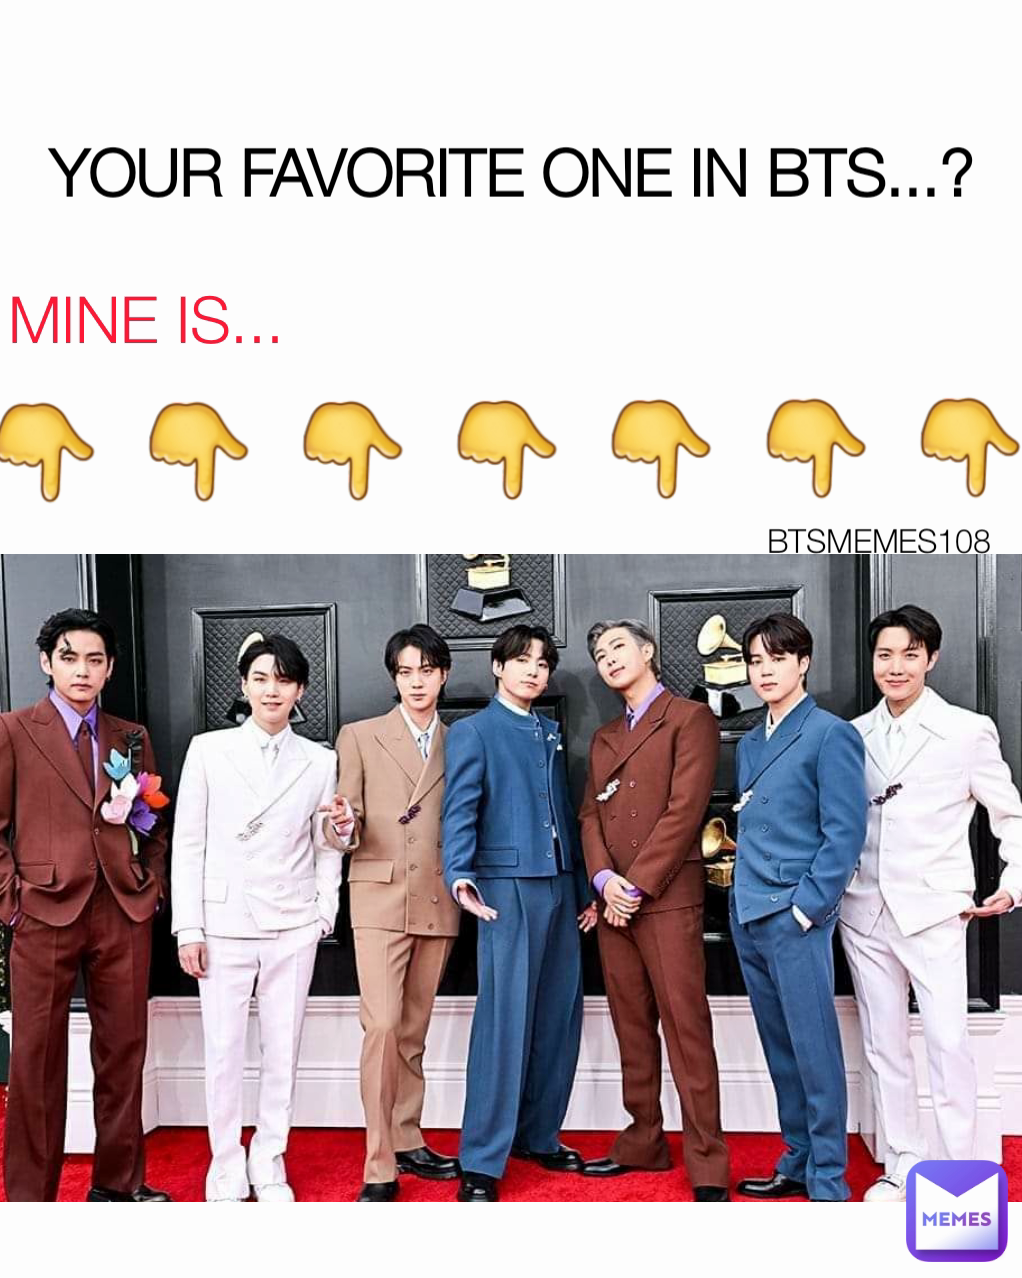 MINE IS... YOUR FAVORITE ONE IN BTS...? 👇👇👇👇👇👇👇 BTSMEMES108 